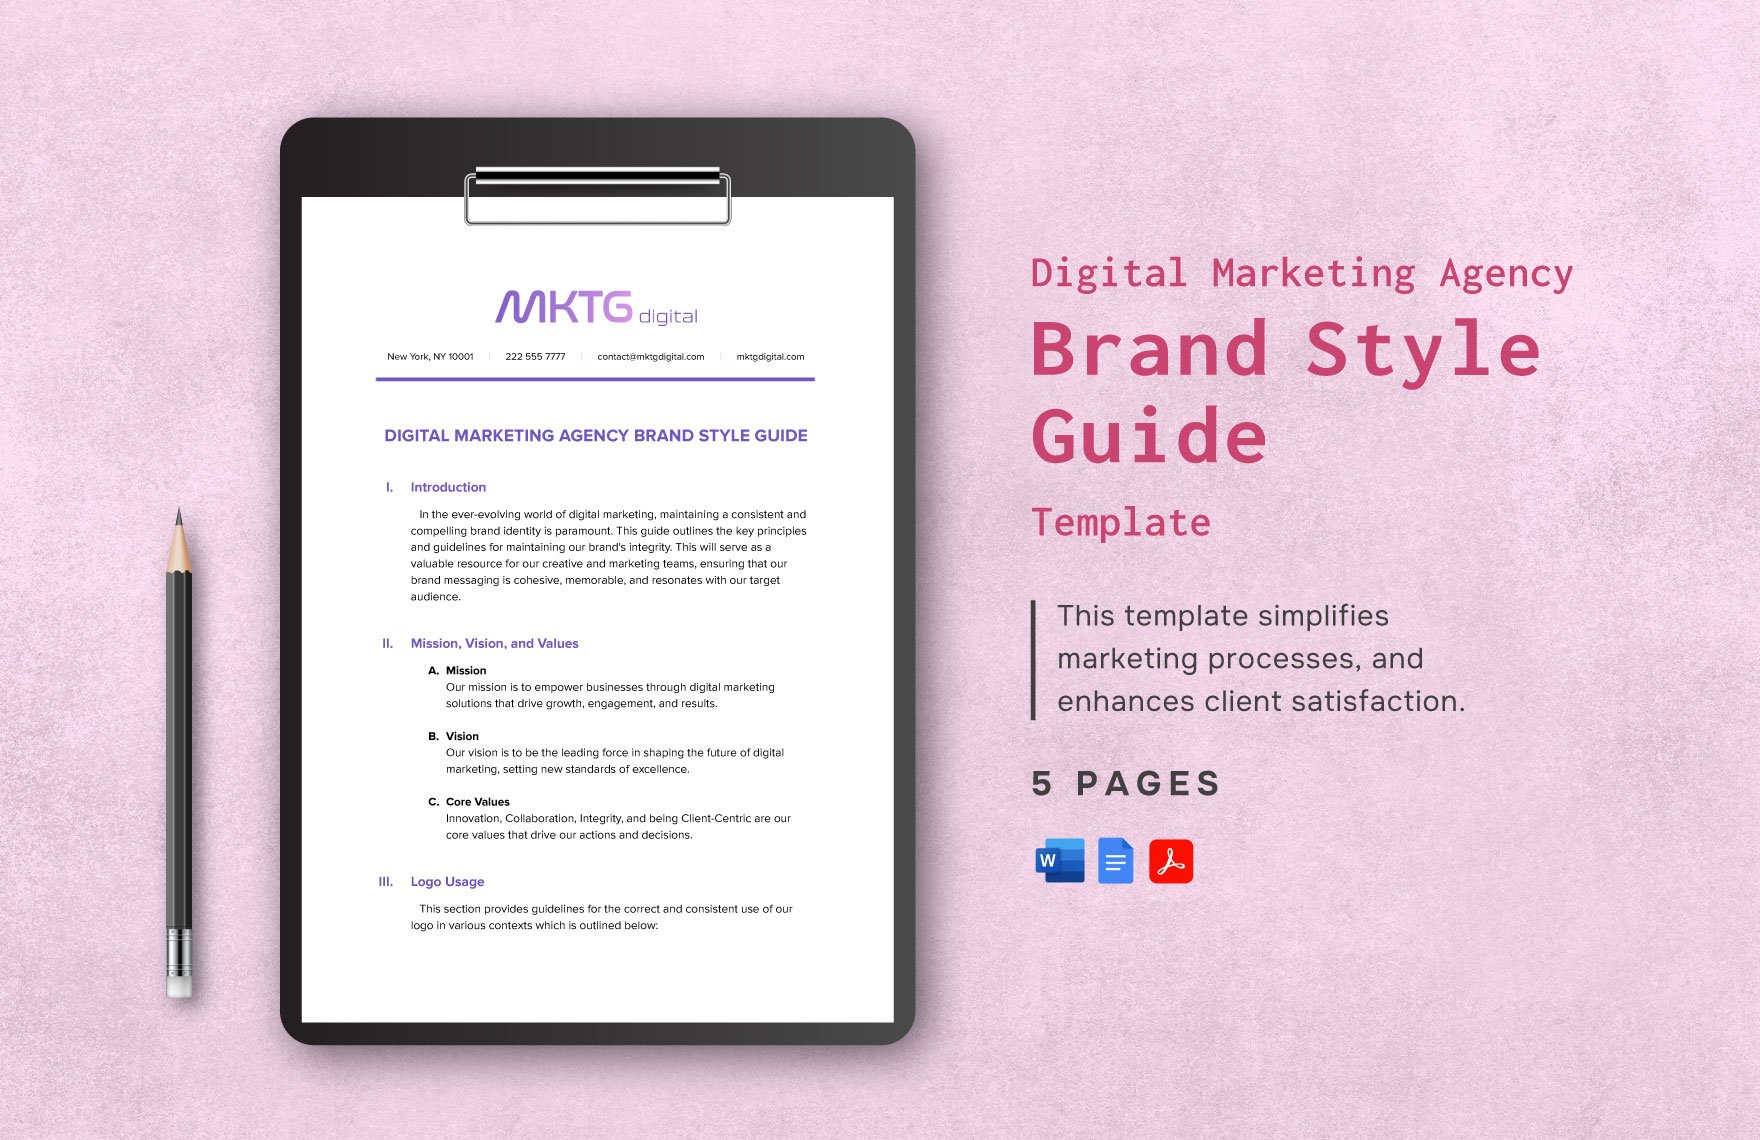 Digital Marketing Agency Brand Style Guide Template in Word, Google Docs, PDF